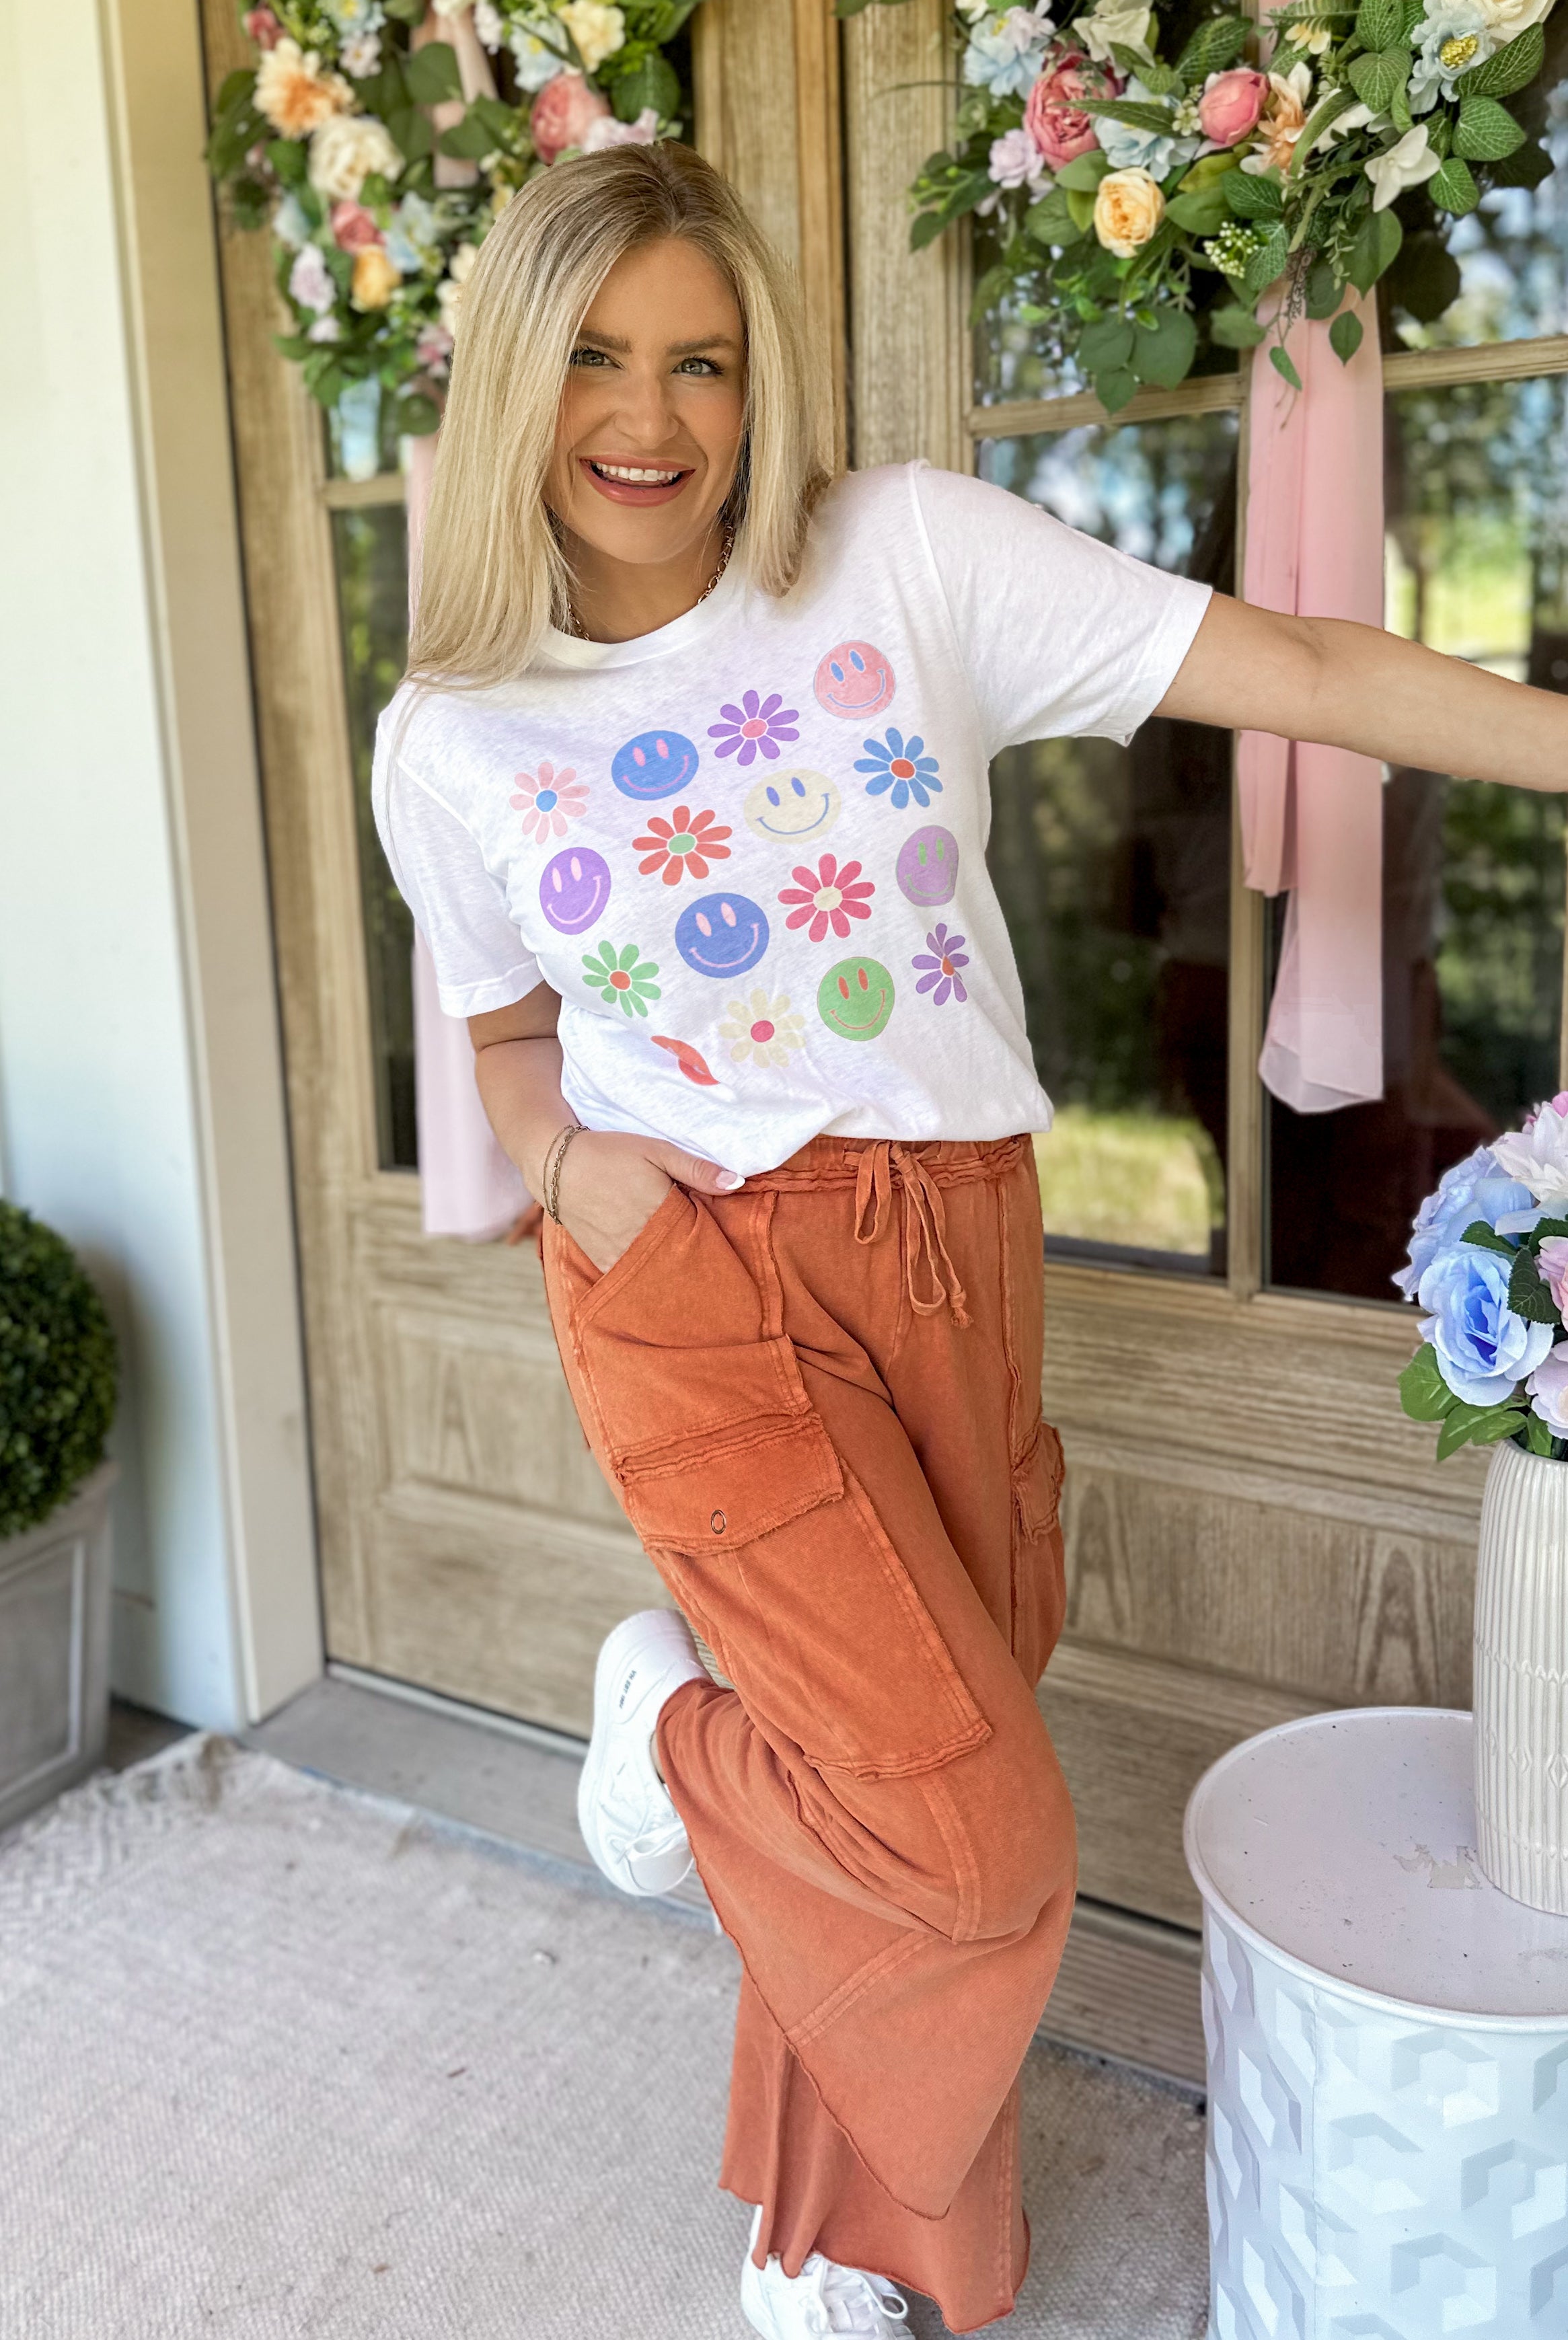 Happy Flowers Short Sleeve Graphic Tee - Be You Boutique